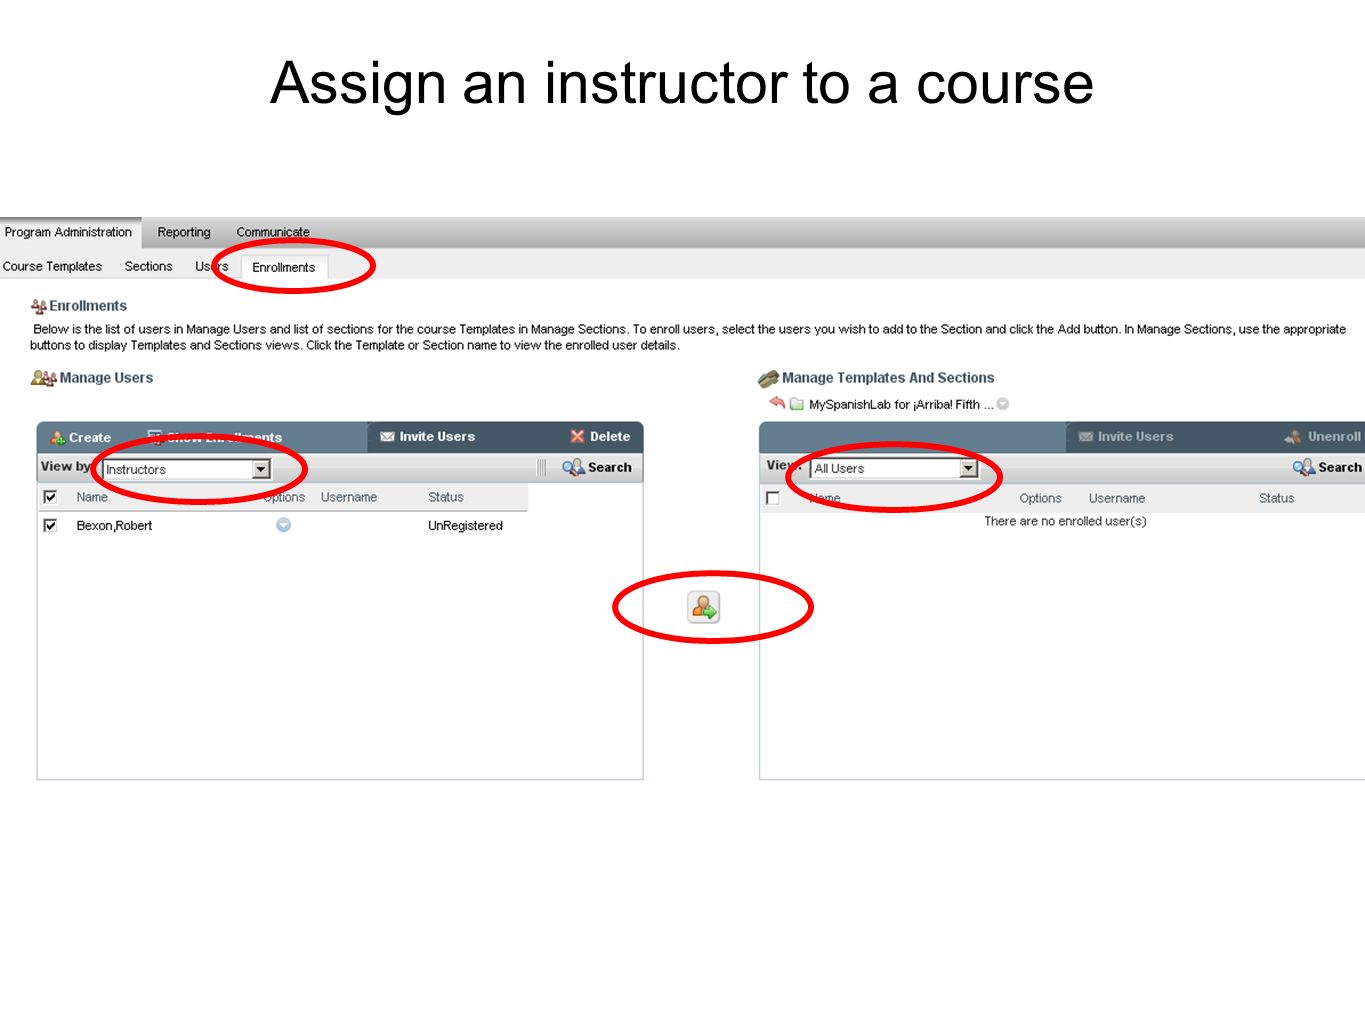 Assign an instructor to a course